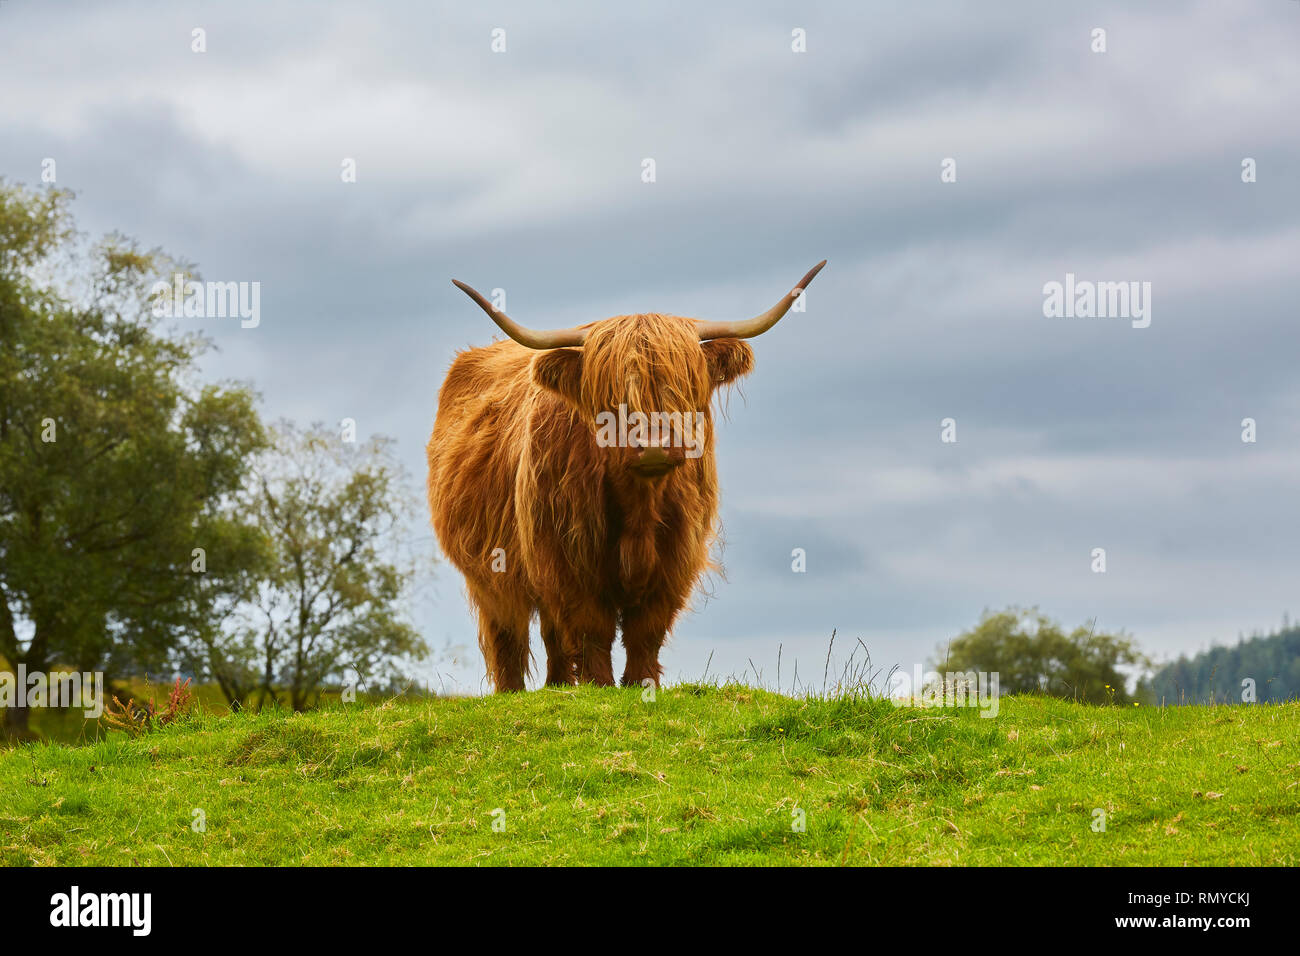 A Highland Cow own its own stood next to a bush looking towards the camera in the Highlands of Scotland with grey clouds in the background Stock Photo